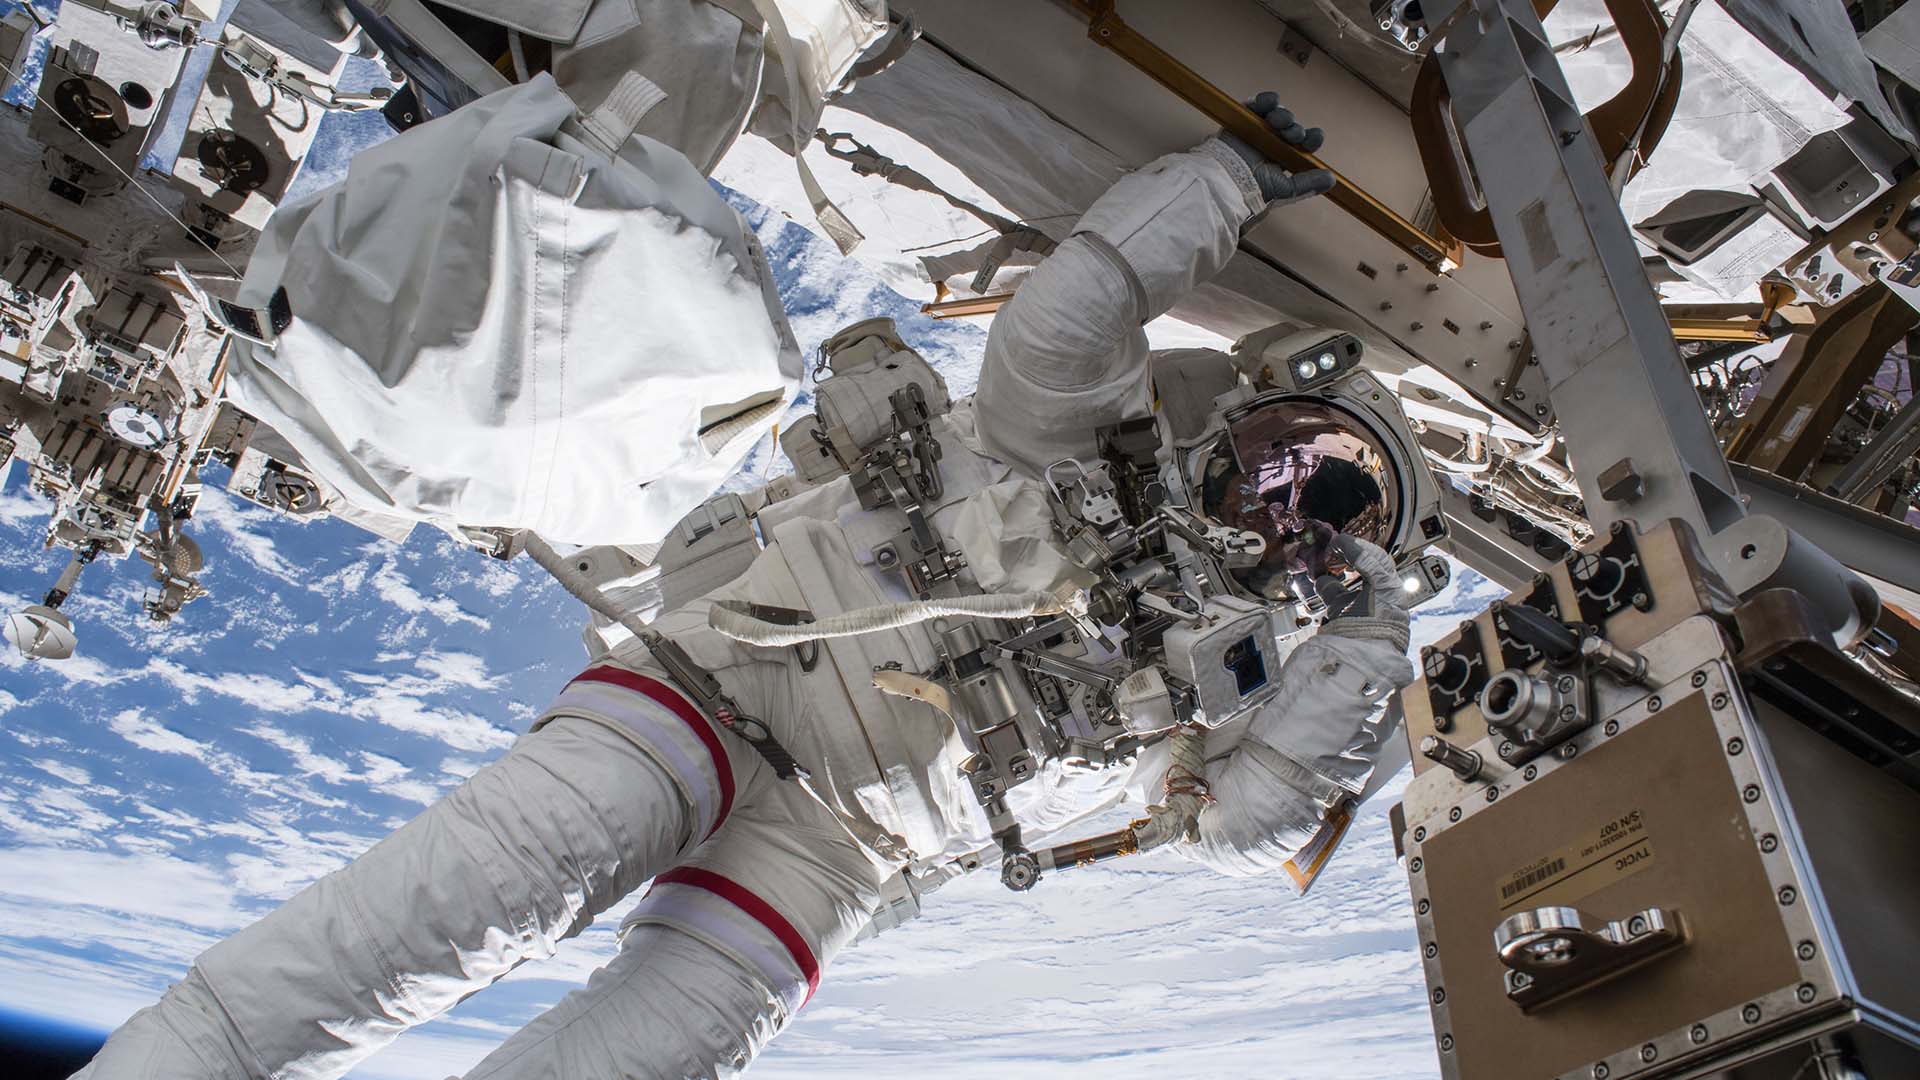 NASA astronaut Drew Feustel conducting a spacewalk on the International Space Station in 2018; Photo Credit: NASA